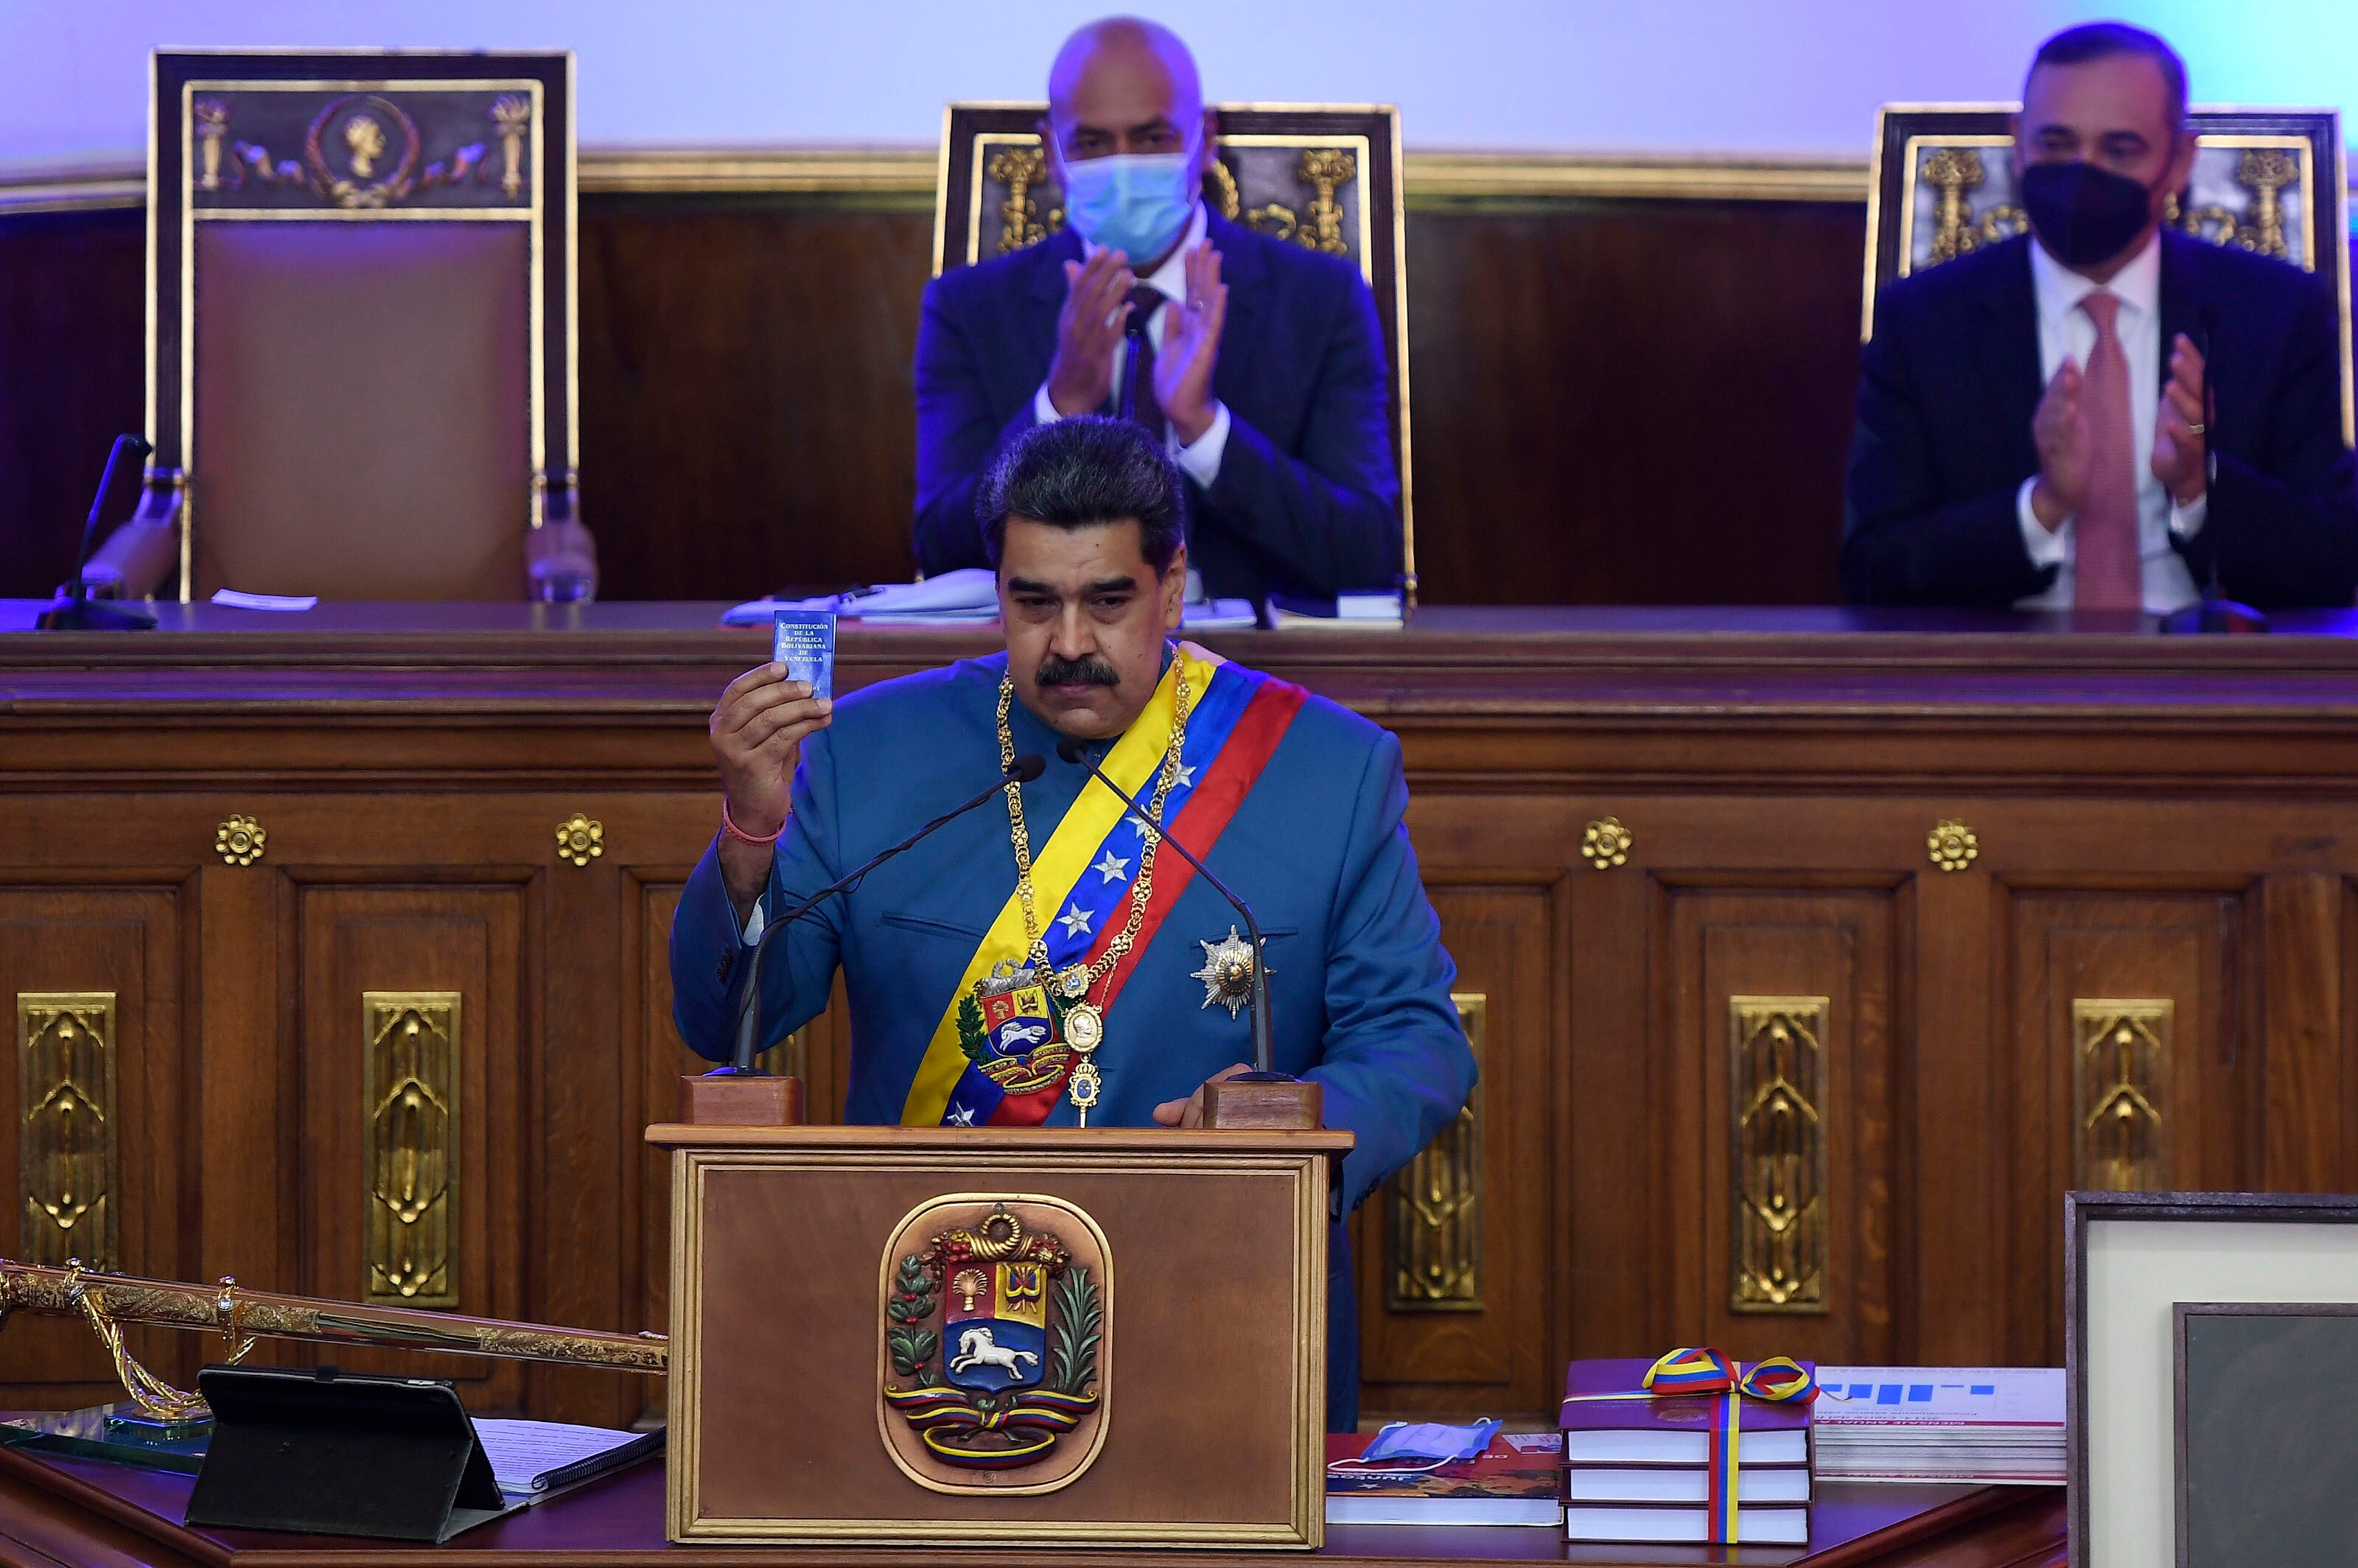 Venezuela's Nicolás Maduro holds a copy of the constitution during his annual address to the nation before lawmakers at the National Assembly in Caracas, Venezuela, Tuesday, Jan. 12, 2021.